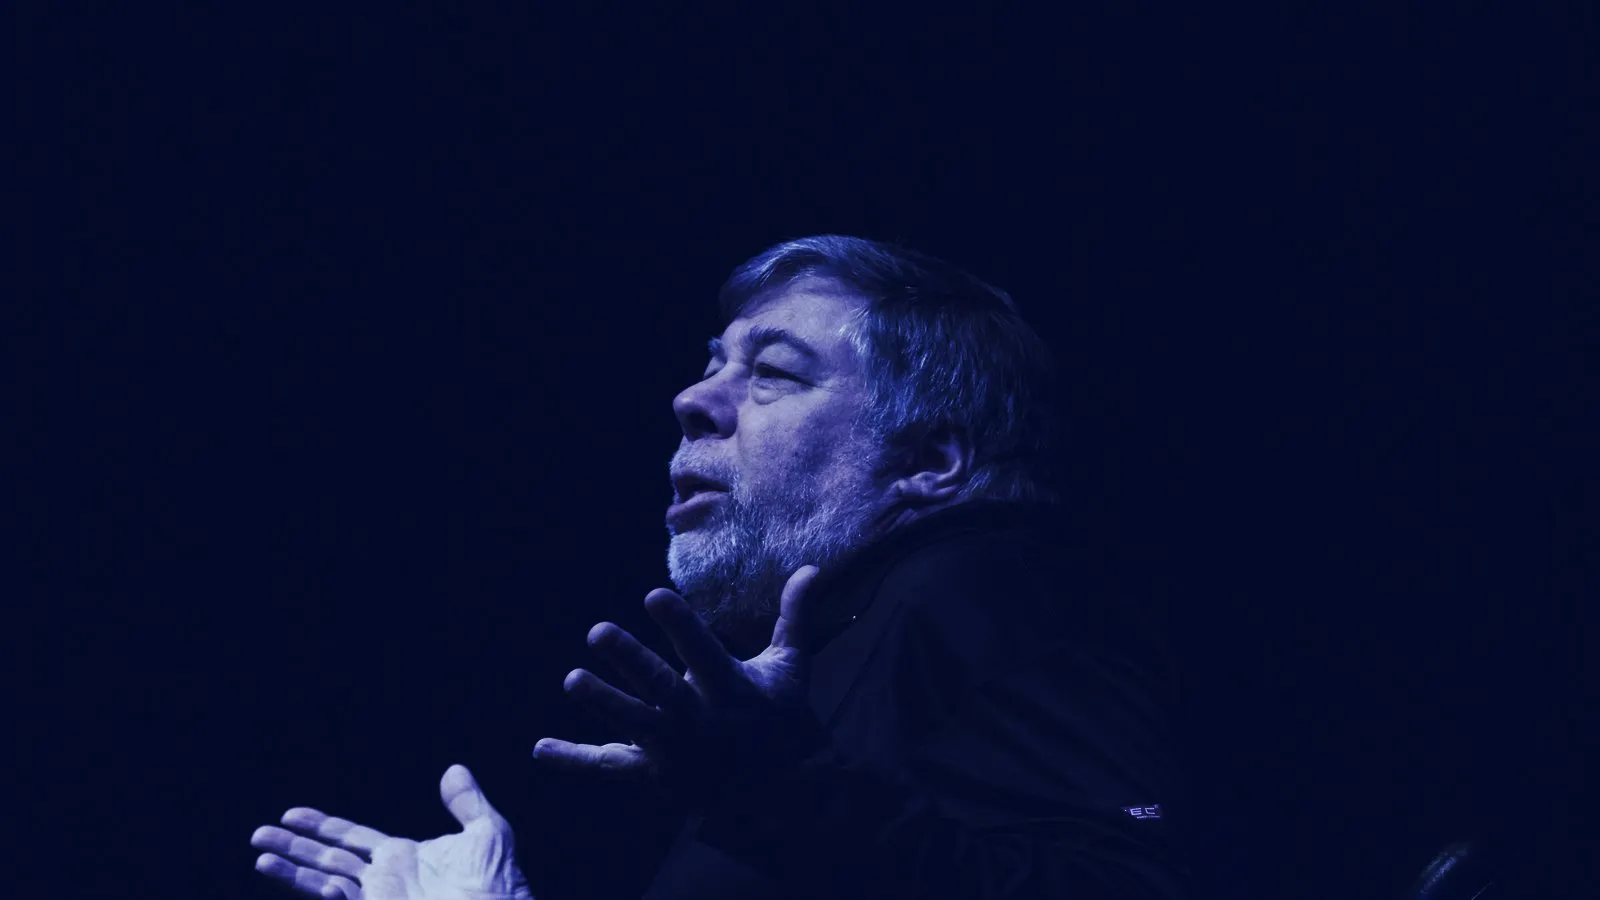 Steve Wozniak a co-founder of Apple computers gives lecture on innovation and entrepreneurship as part of the Anderson Chandler Lecture series at LIED center. Image: Shutterstock